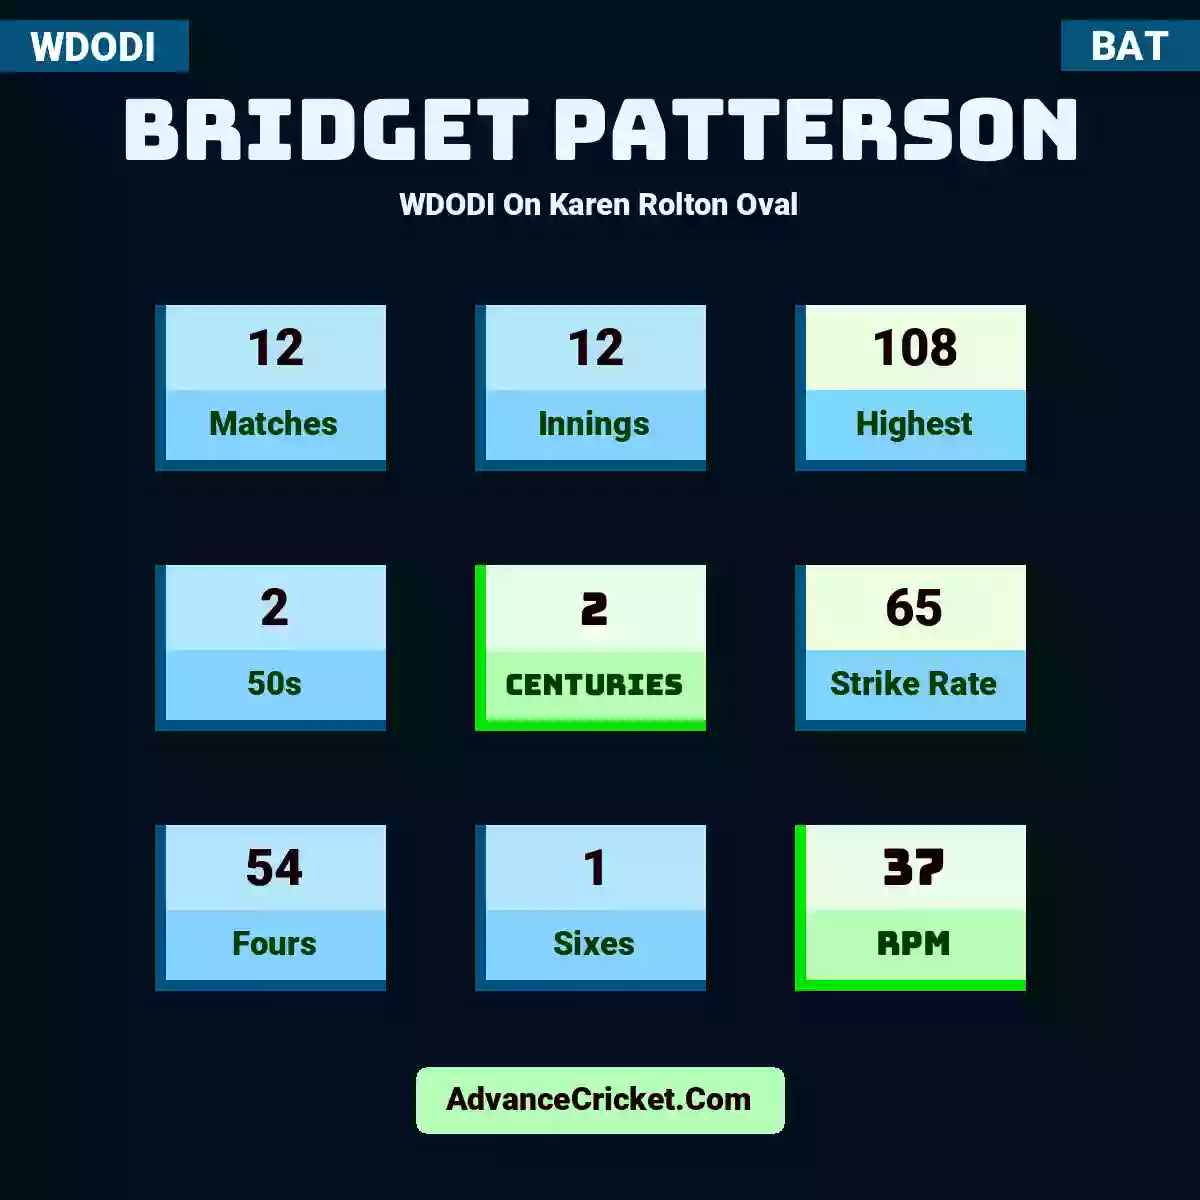 Bridget Patterson WDODI  On Karen Rolton Oval, Bridget Patterson played 12 matches, scored 108 runs as highest, 2 half-centuries, and 2 centuries, with a strike rate of 65. B.Patterson hit 54 fours and 1 sixes, with an RPM of 37.